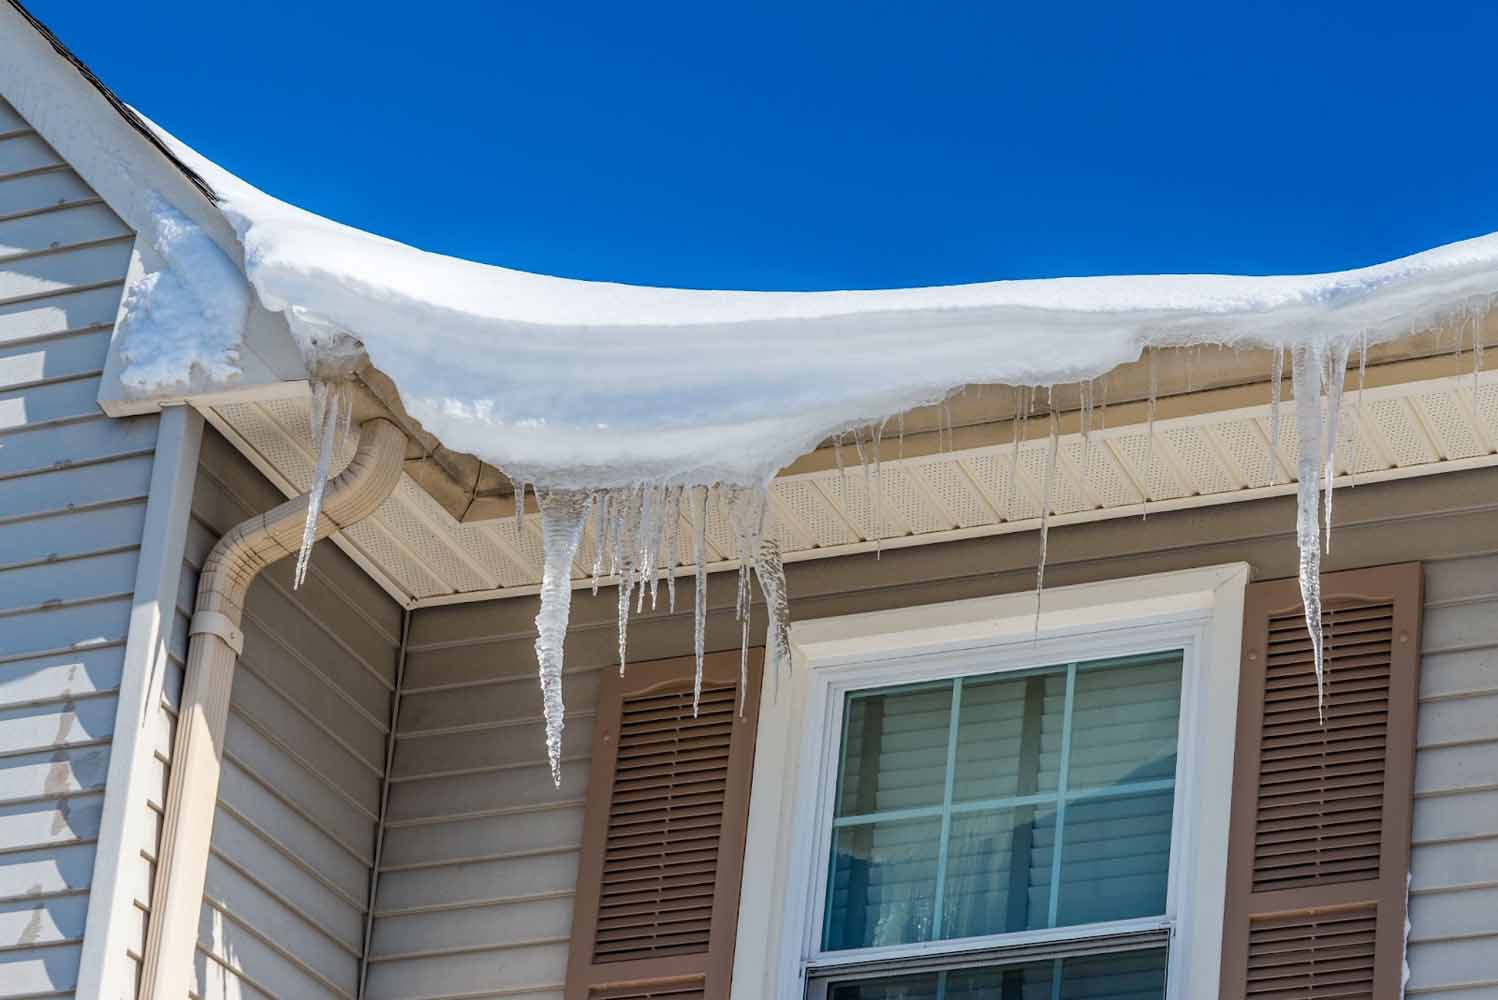 Ice dam, icicles, and snow built up on the eaves of a tan house